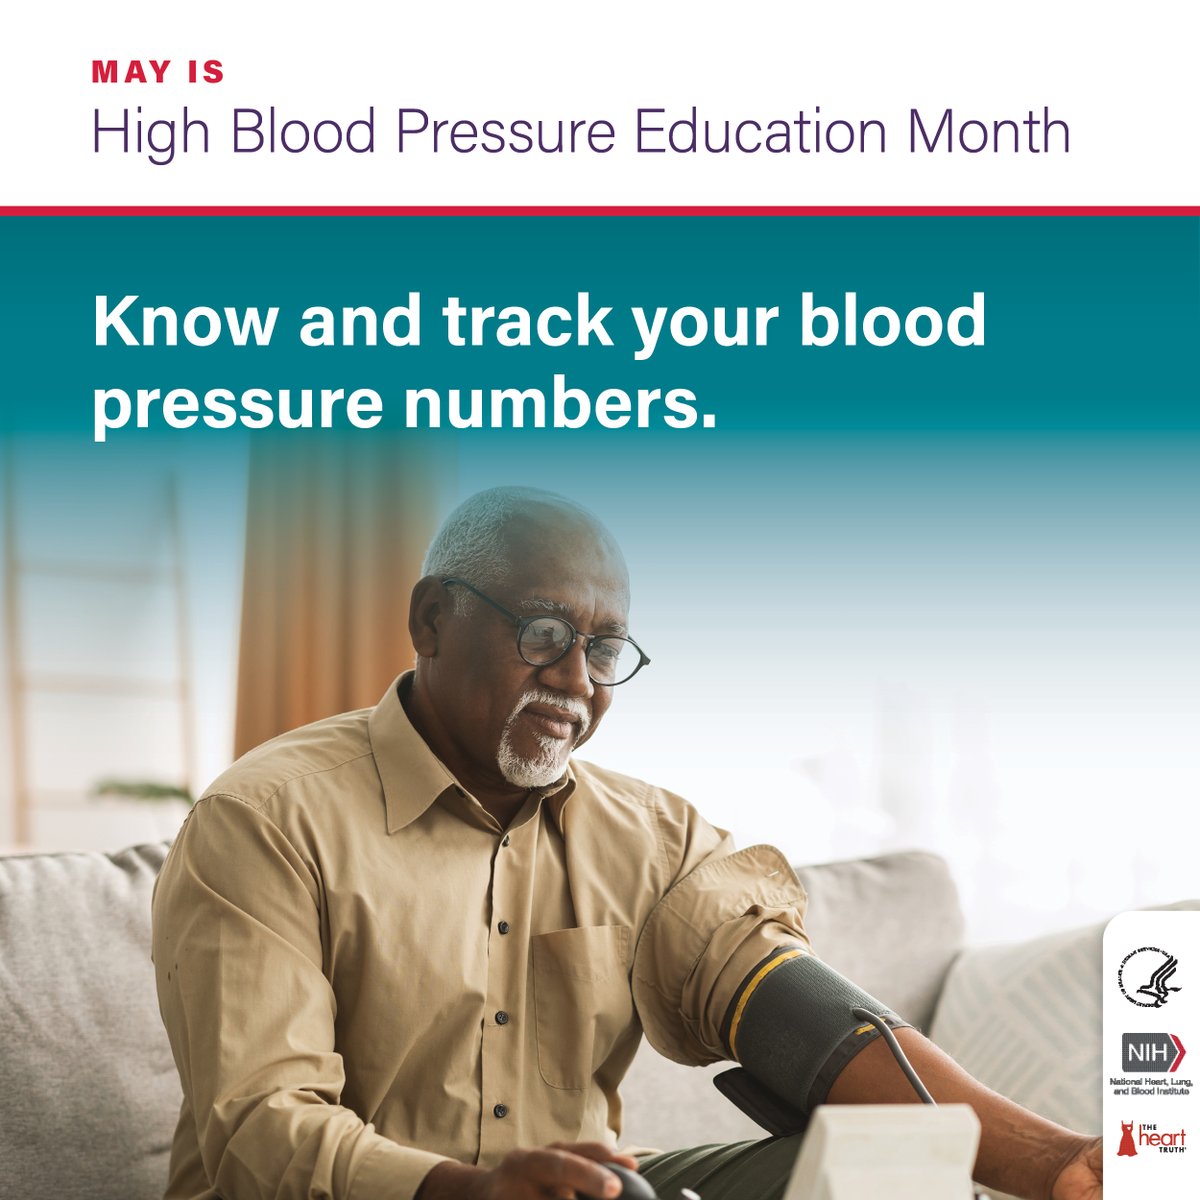 It’s important to keep track of your numbers and know what they mean for your heart health! Make sure you have your blood pressure checked at each healthcare provider visit. #HighBloodPressureMonth